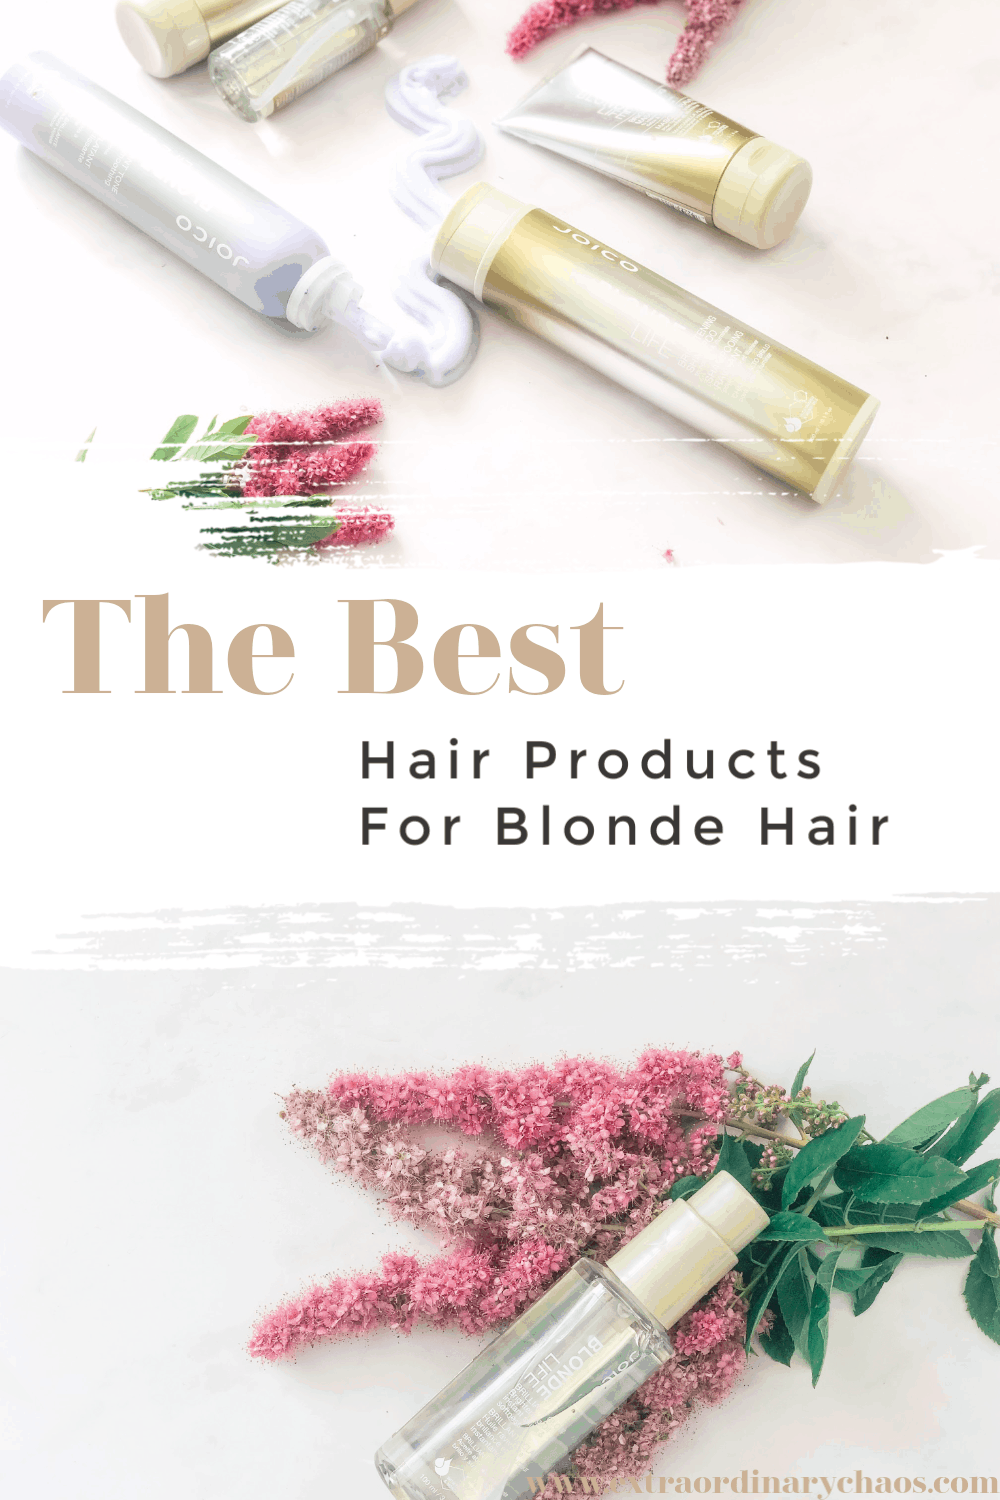 The best hair products for blonde hair